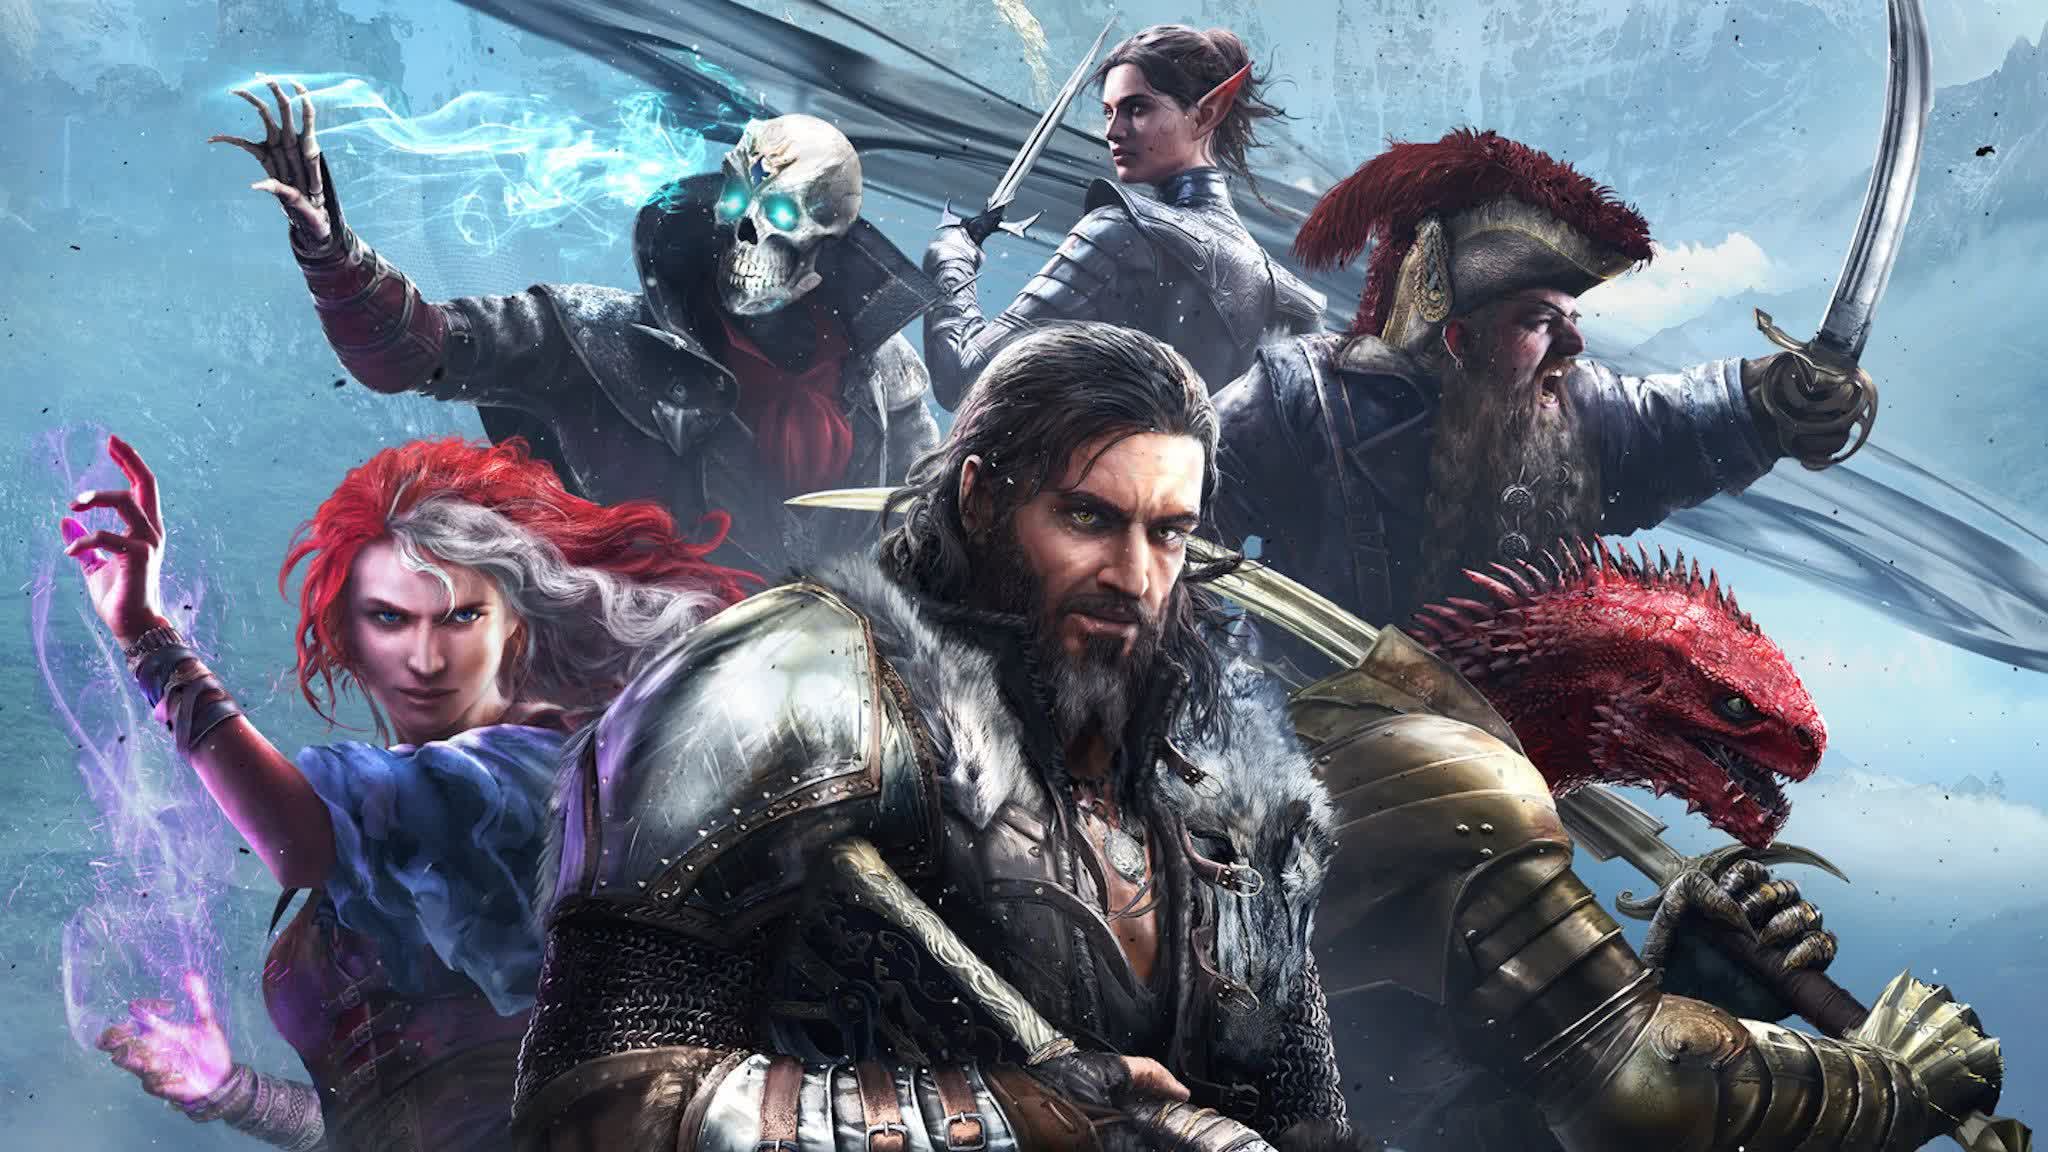 Larian will develop another Divinity: Original Sin game, but not anytime soon